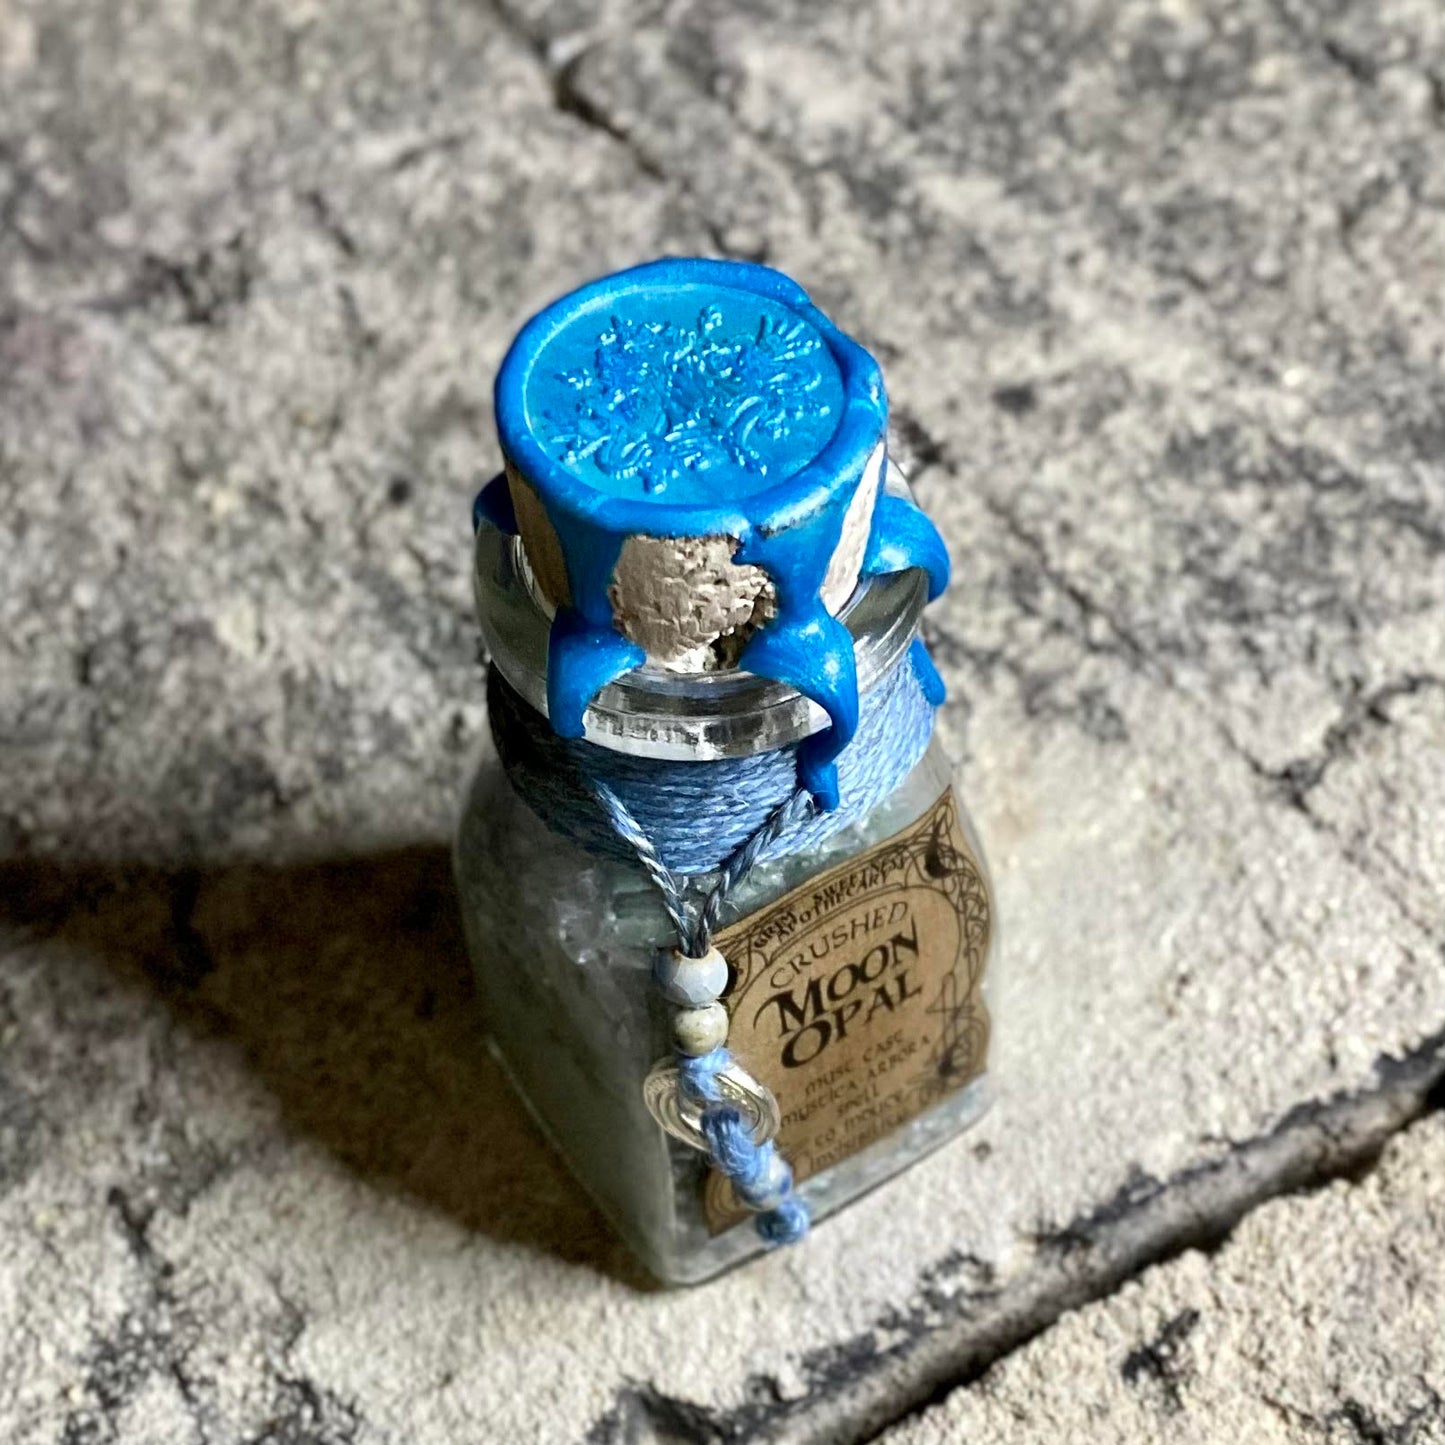 Crushed Moon Opal, A Dragon Prince Themed Apothecary Jar Prop